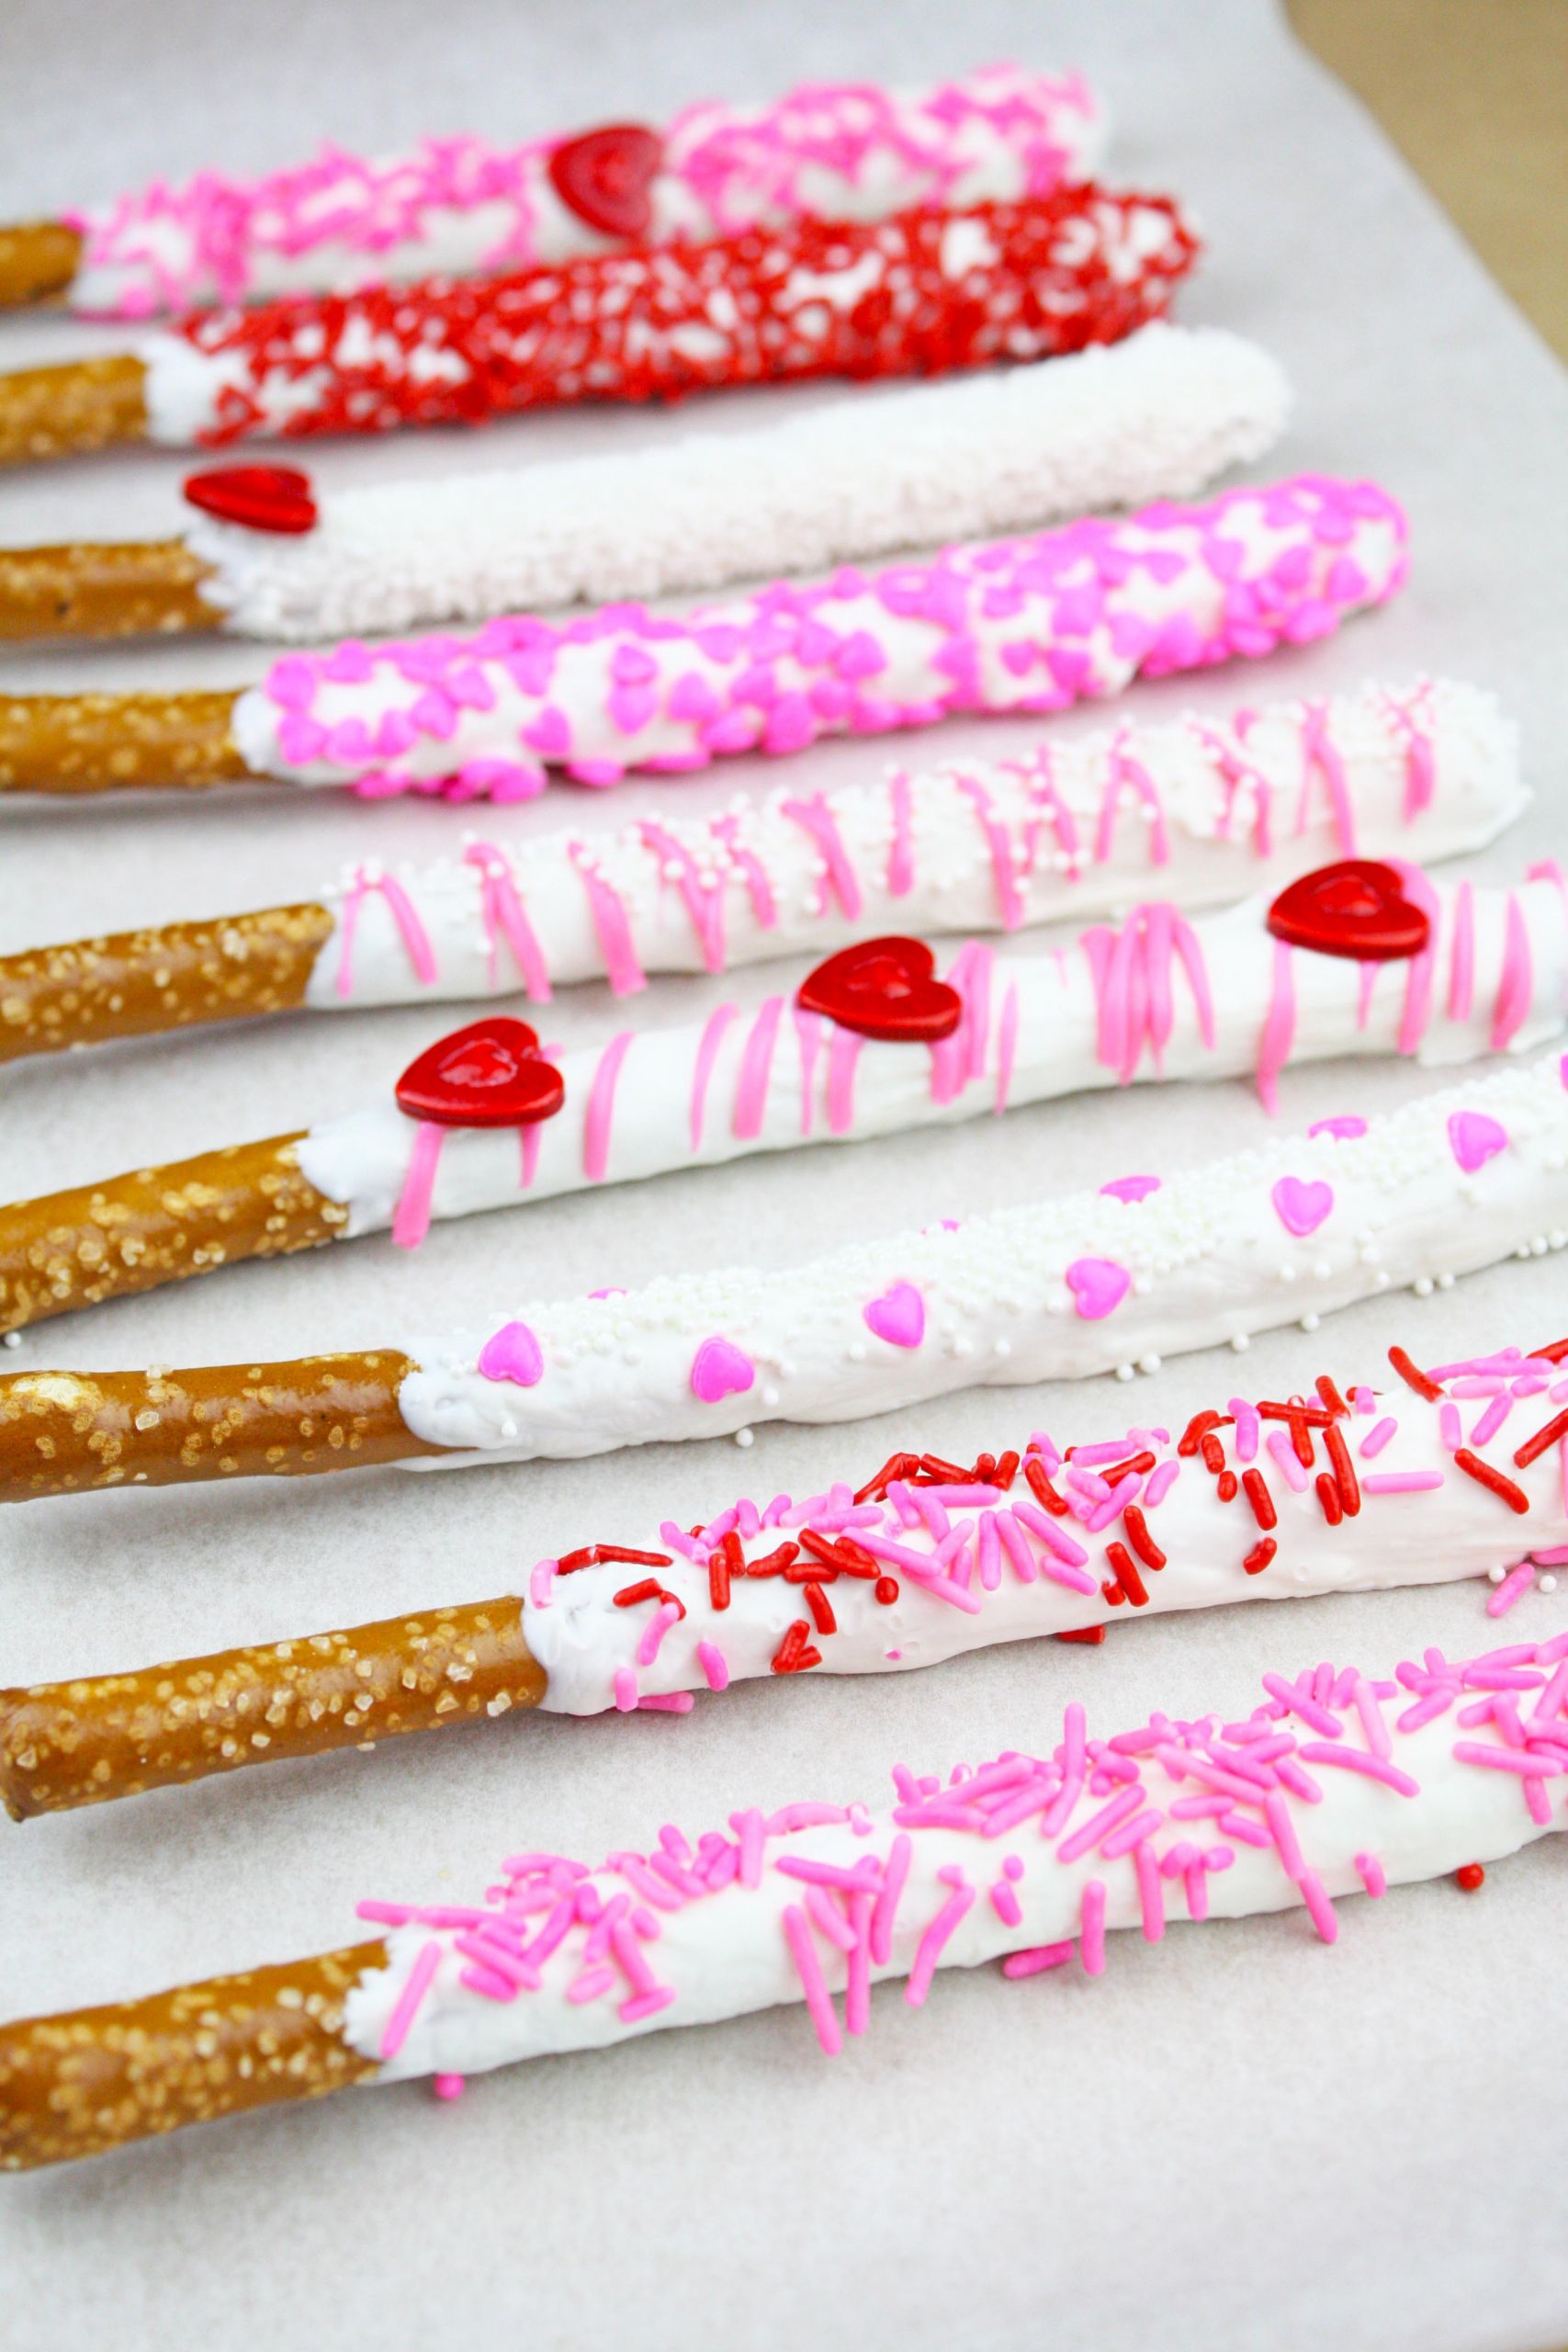 Chocolate Covered Pretzels For Valentines Day
 Valentine s Day Chocolate Covered Pretzels DIY